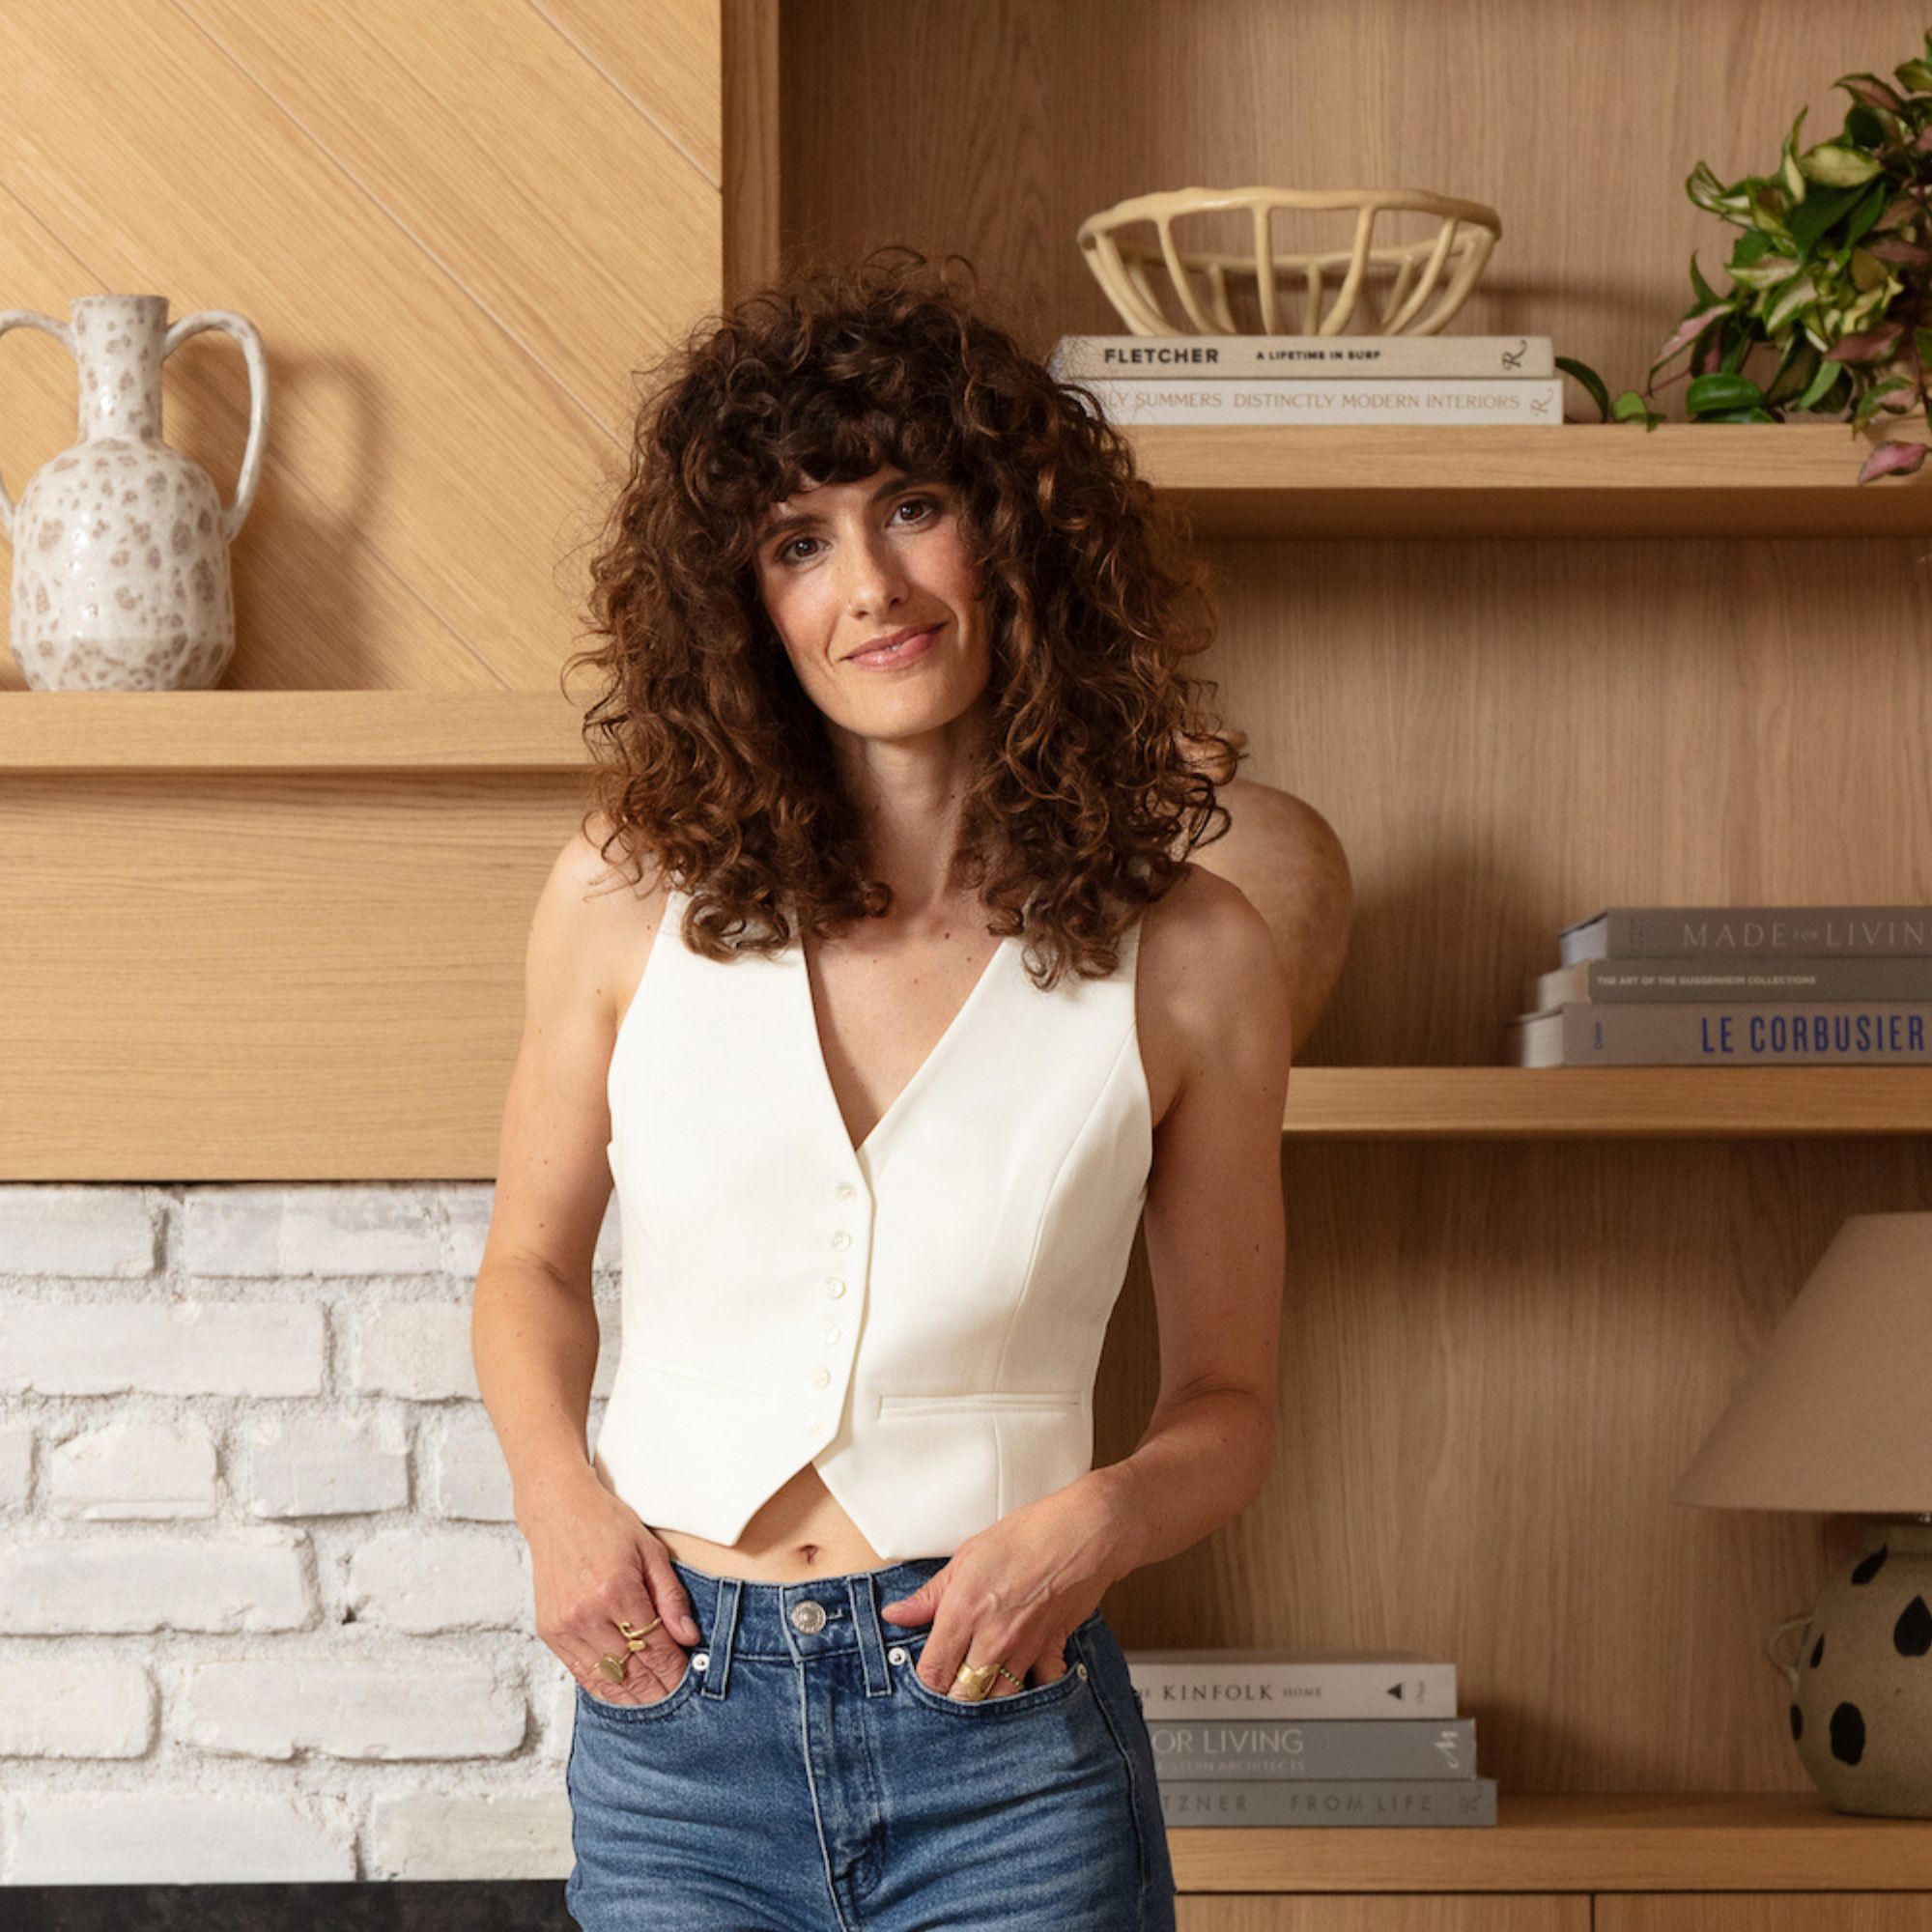 Kara Piepmeyer, a woman with brown curly hair wearing a white waistcoat and jeans, standing in front of wooden shelves with decor on